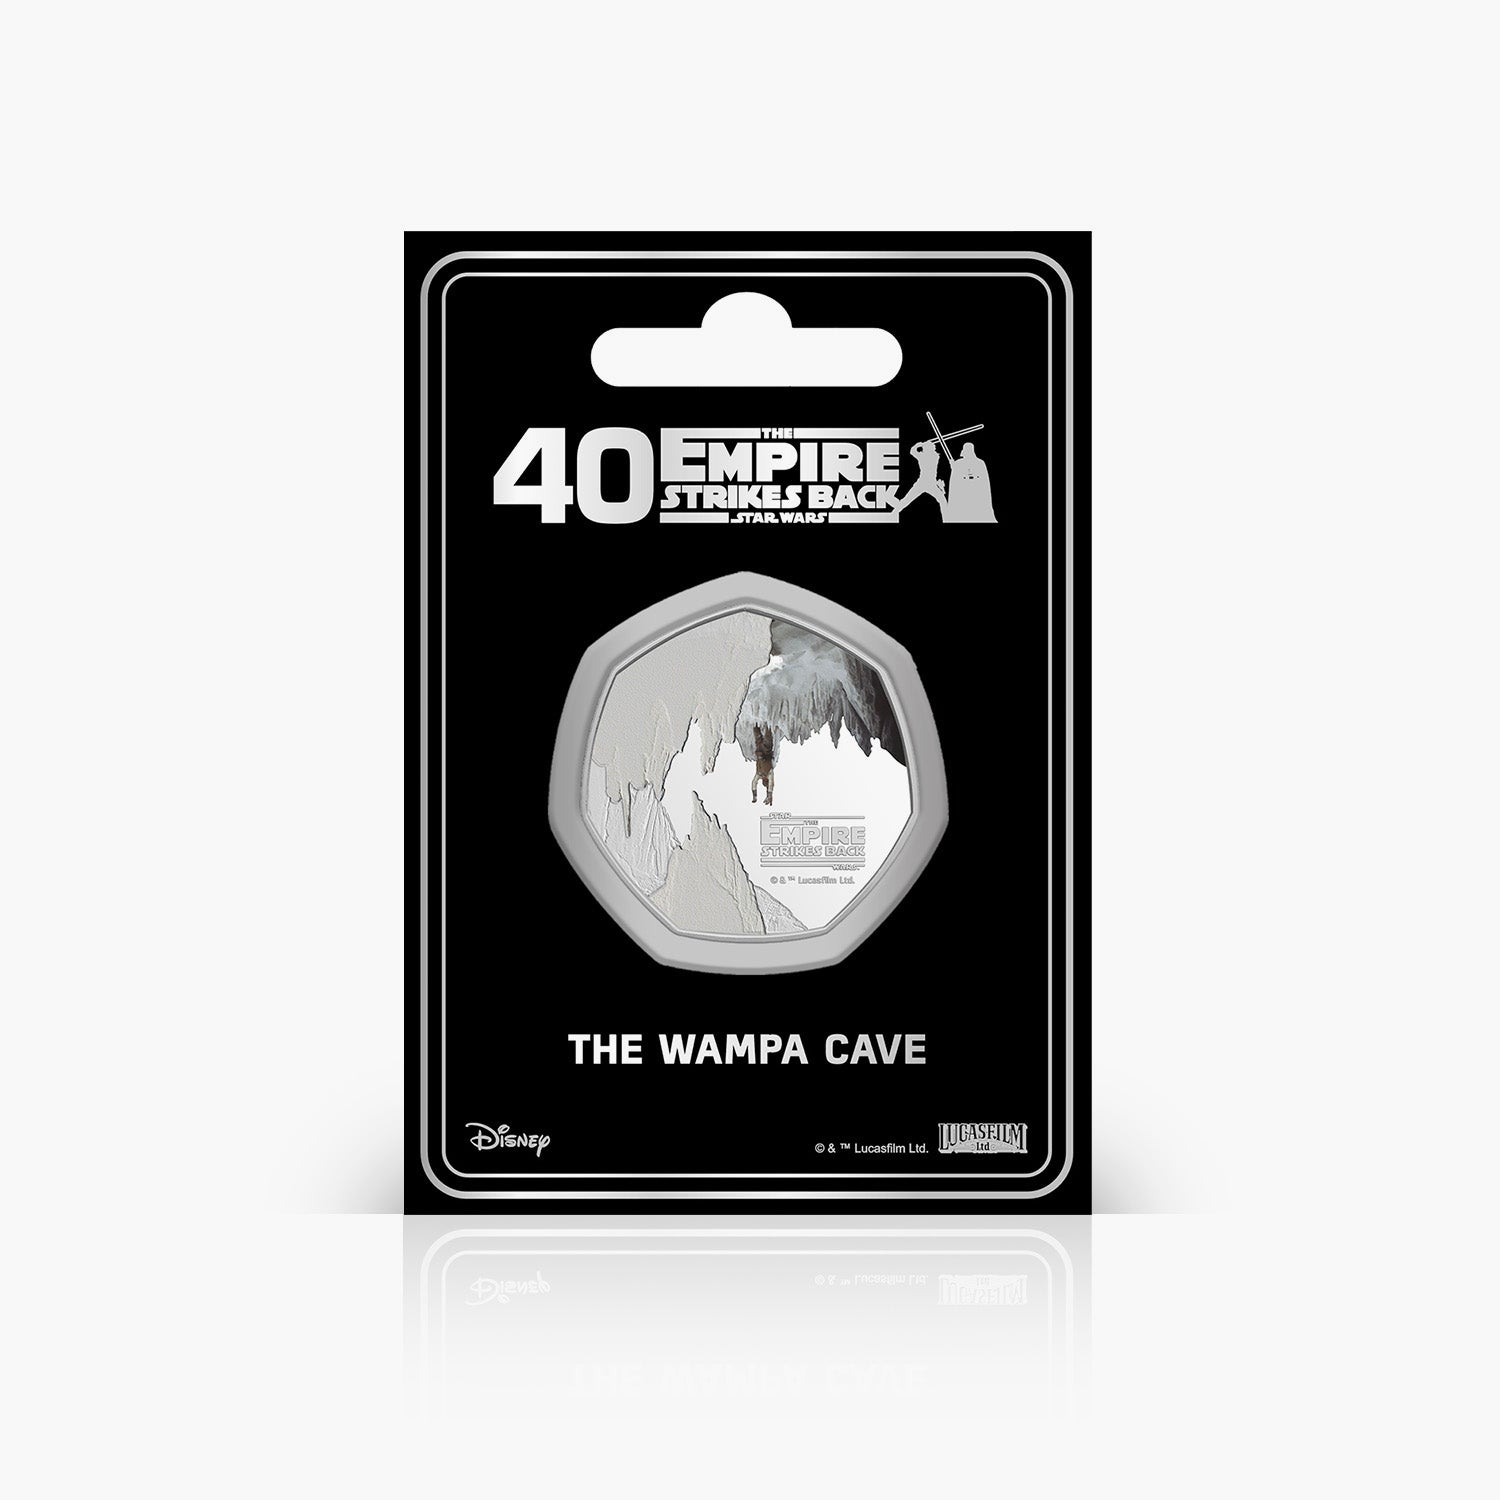 The Wampa Cave Silver Plated Coin